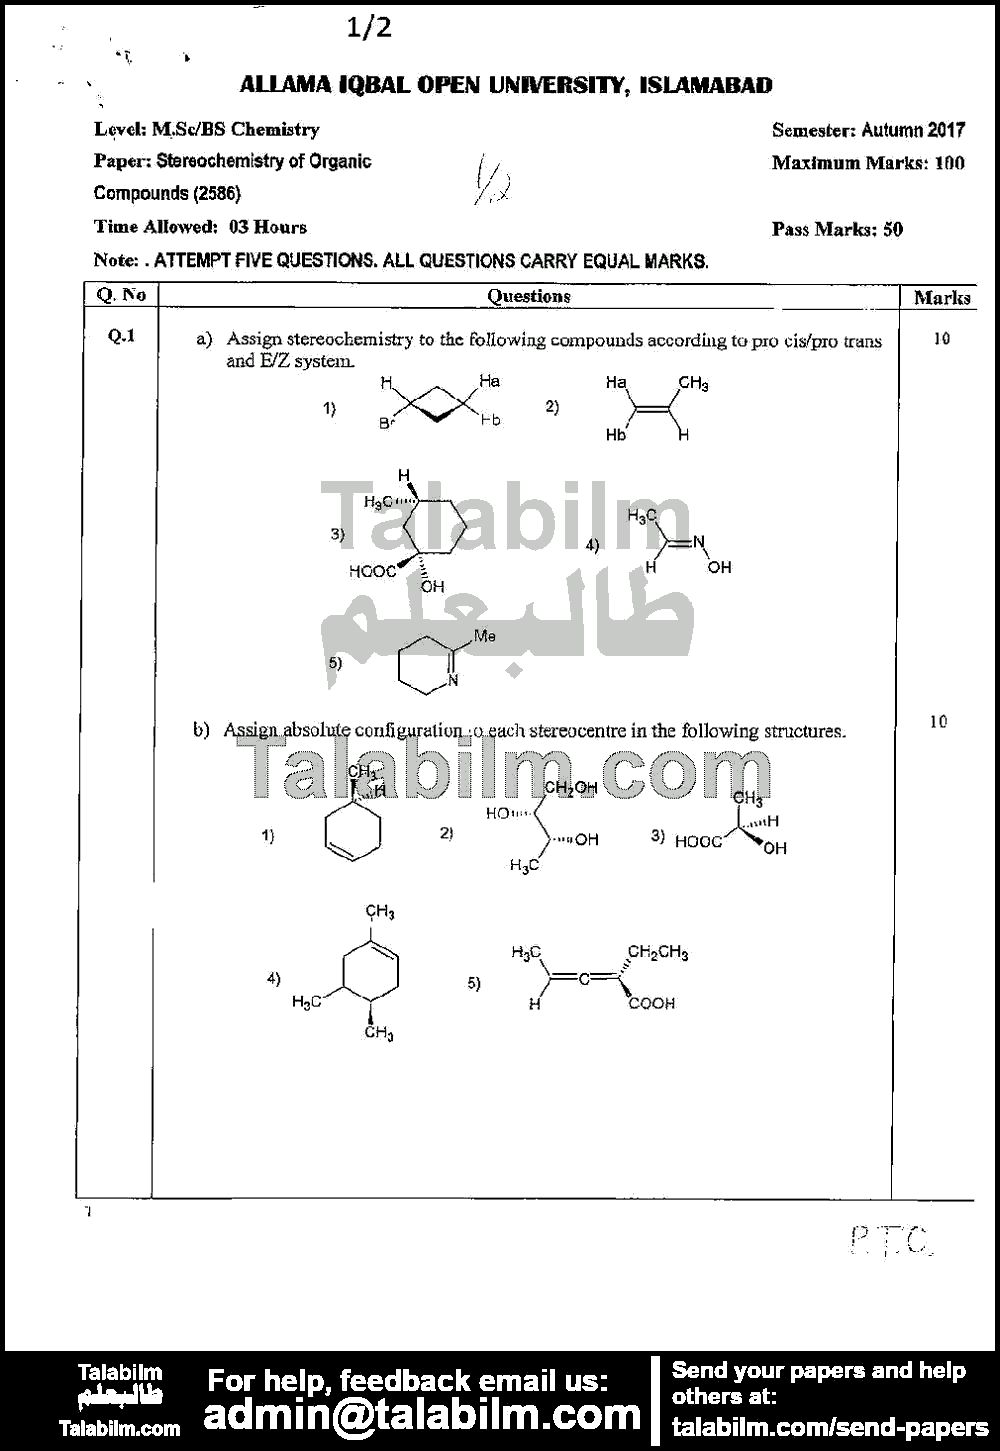 Stereochemistry of Organic Compounds 2586 past paper for Autumn 2017